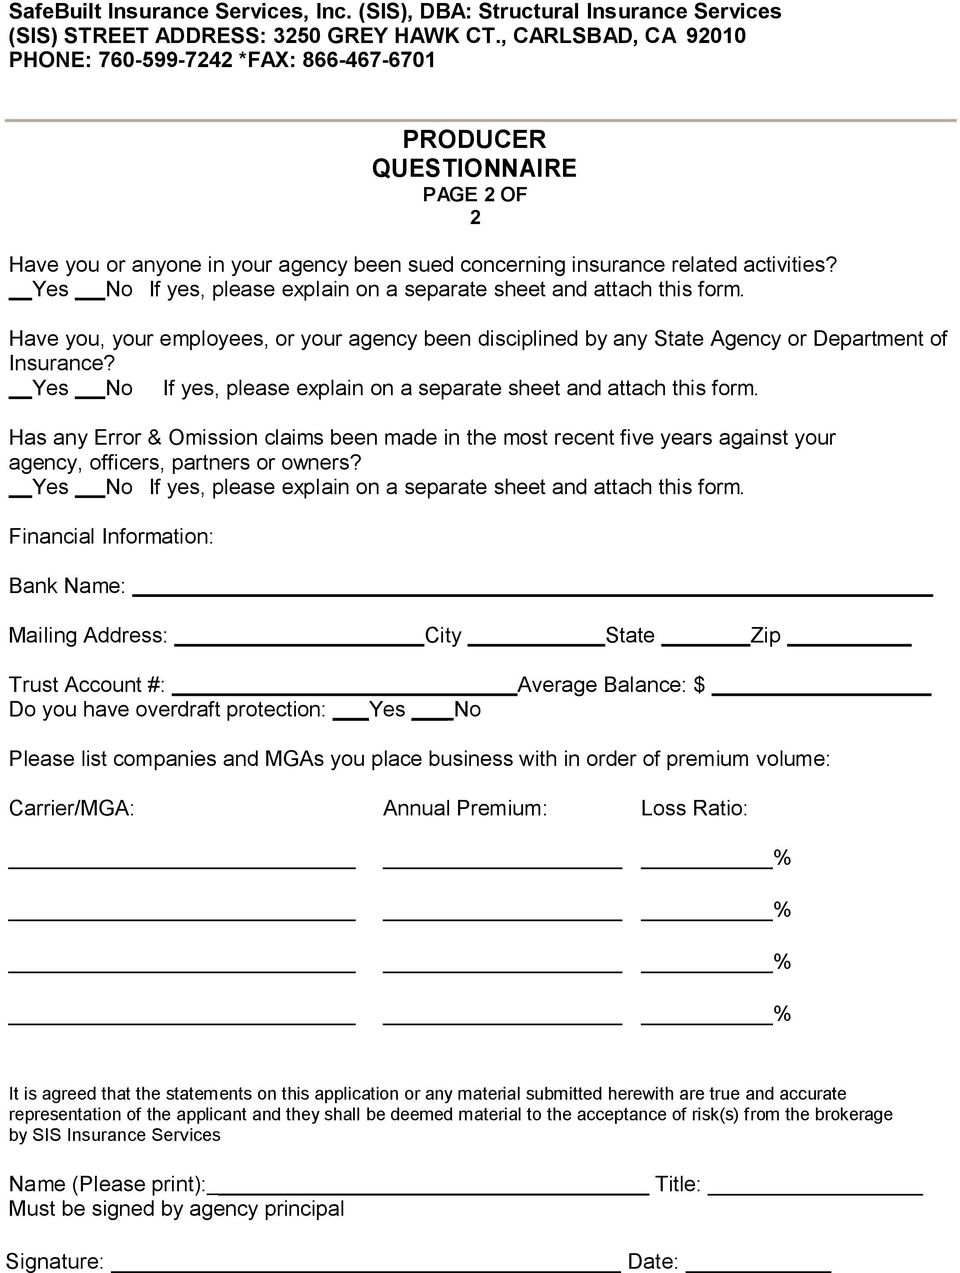 Yes No If yes, please explain on a separate sheet and attach this form. Have you, your employees, or your agency been disciplined by any State Agency or Department of Insurance?